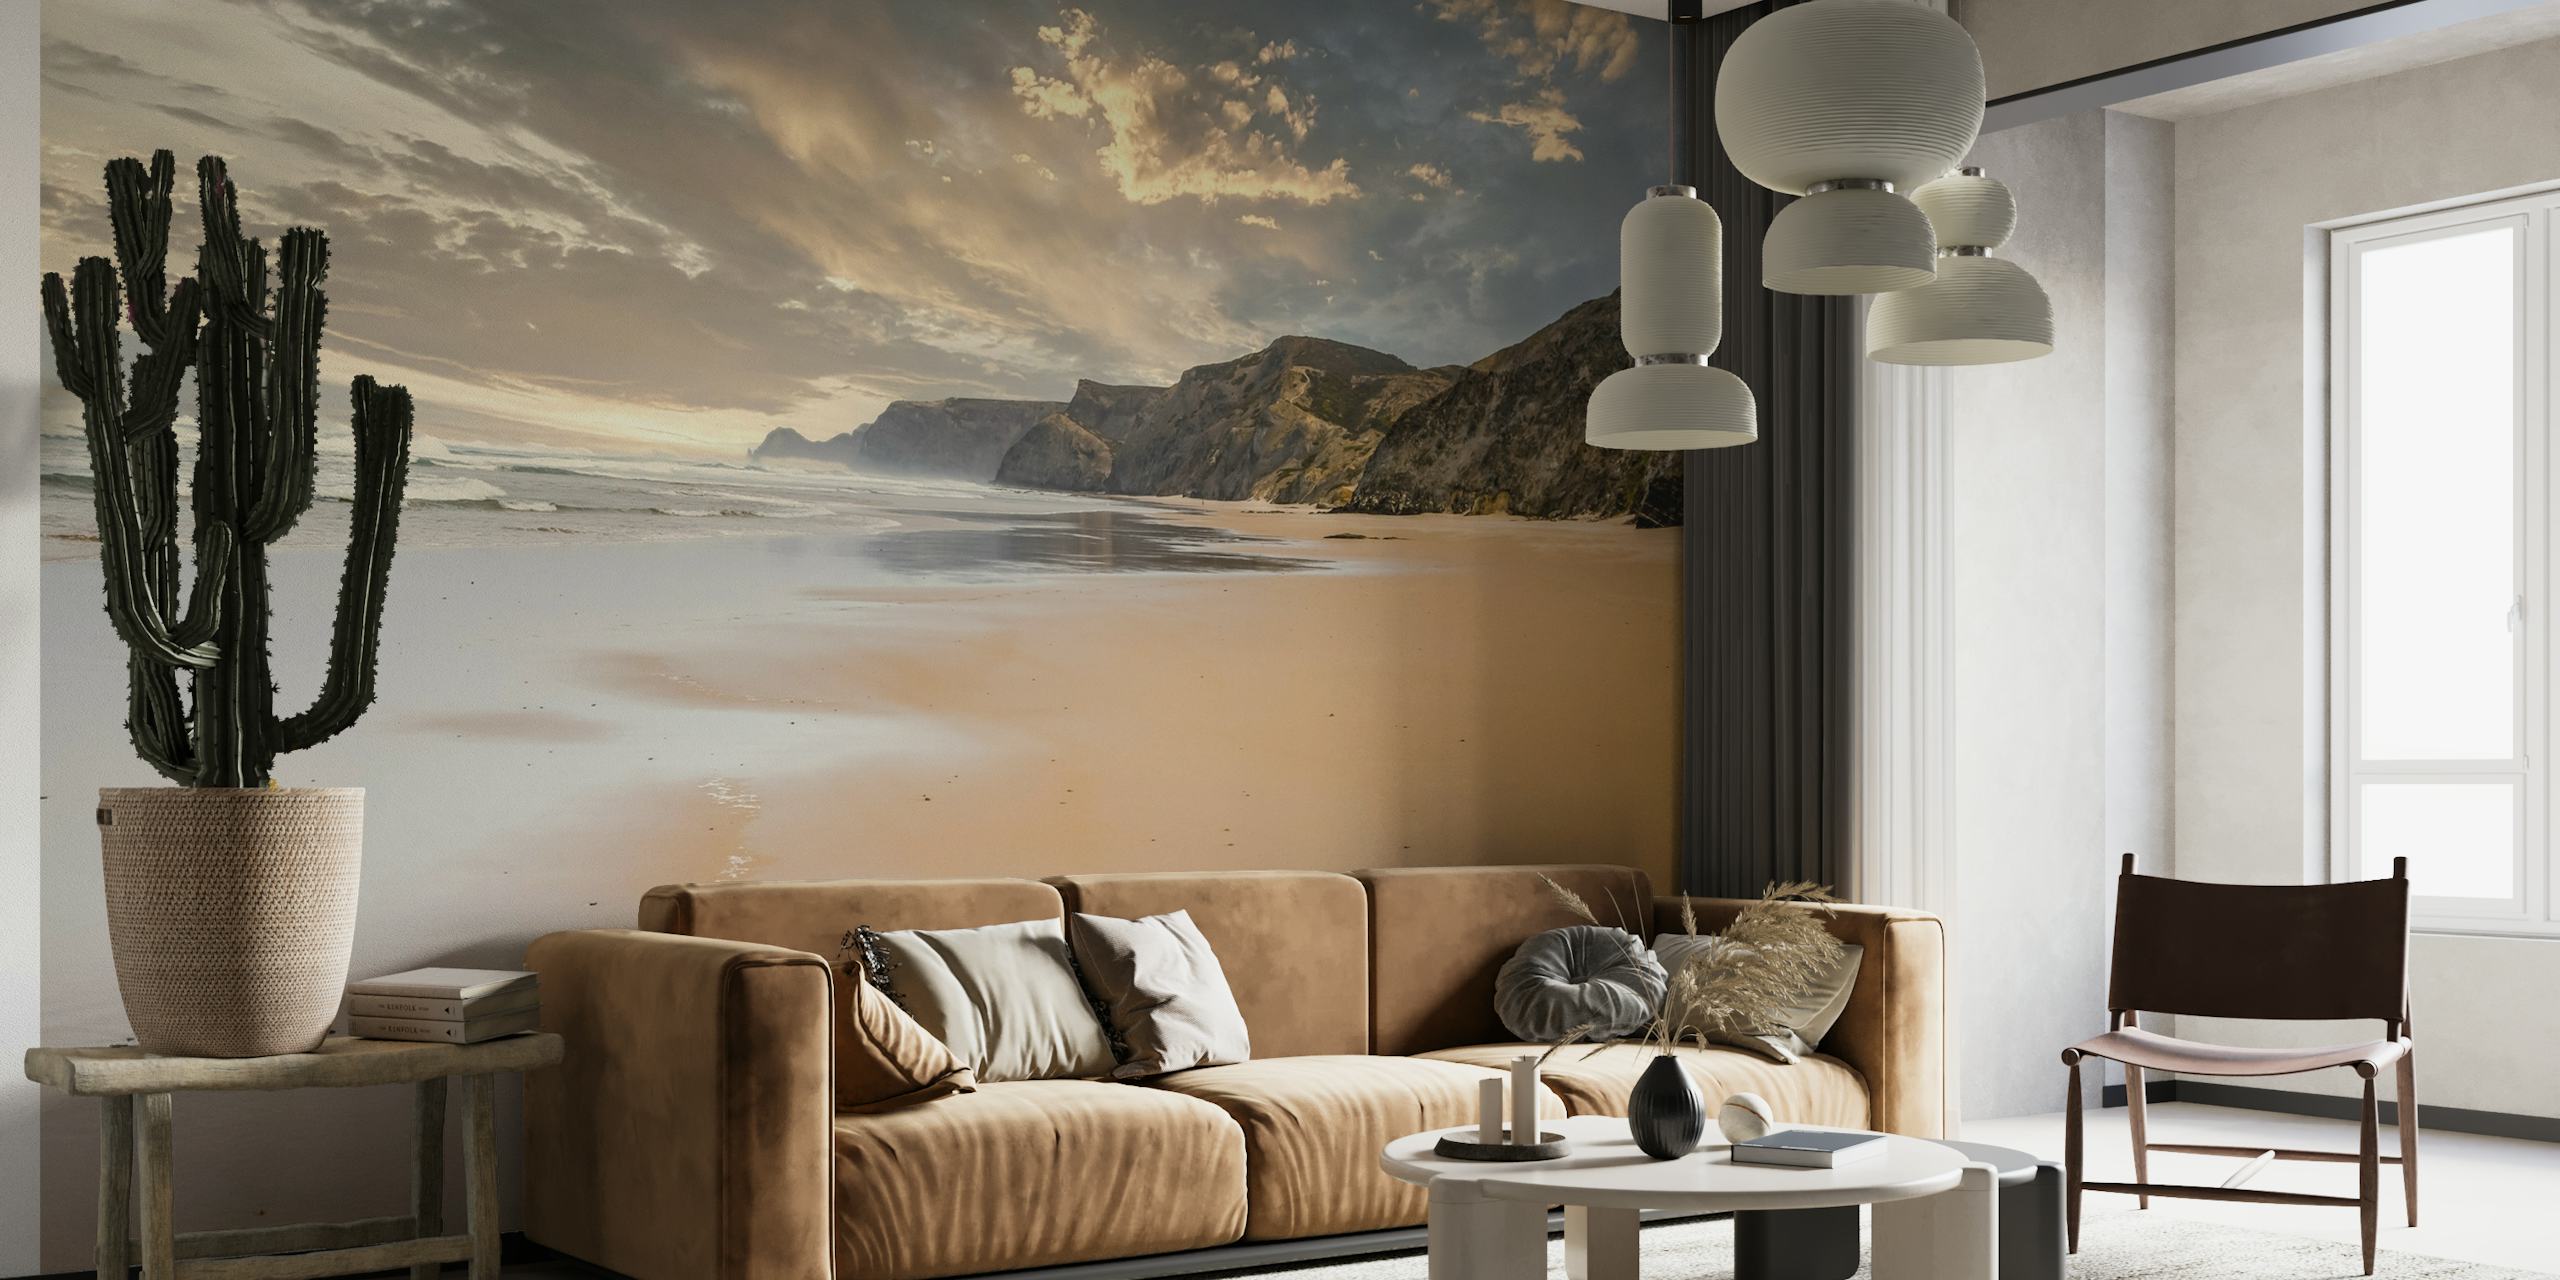 A breathtaking beach sunset in Portugal with cliffs and soft sands, transforming your room into a serene coastal escape.